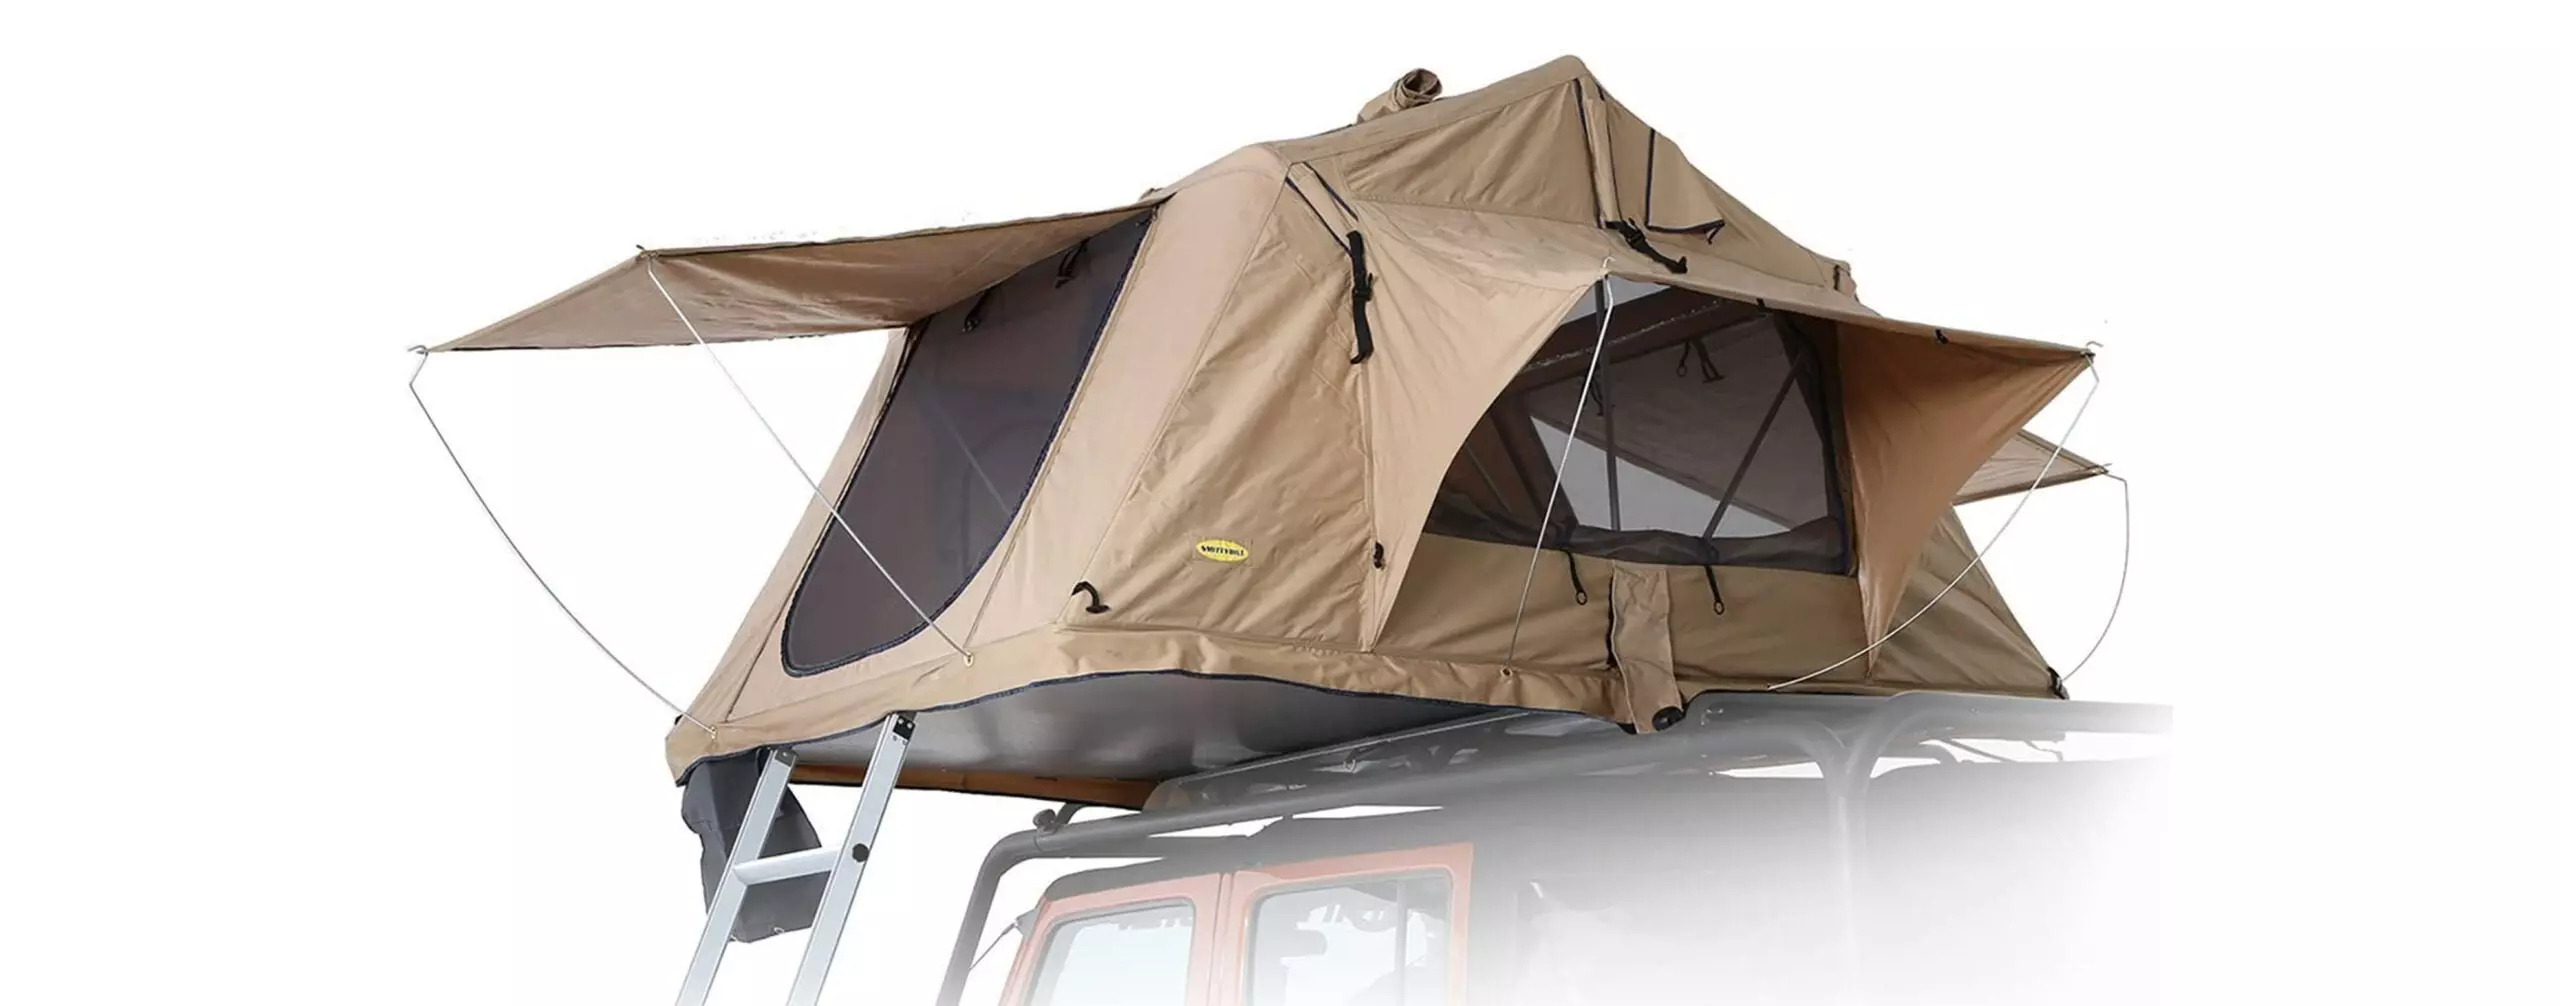 The Best Rooftop Tents (Review) in 2021